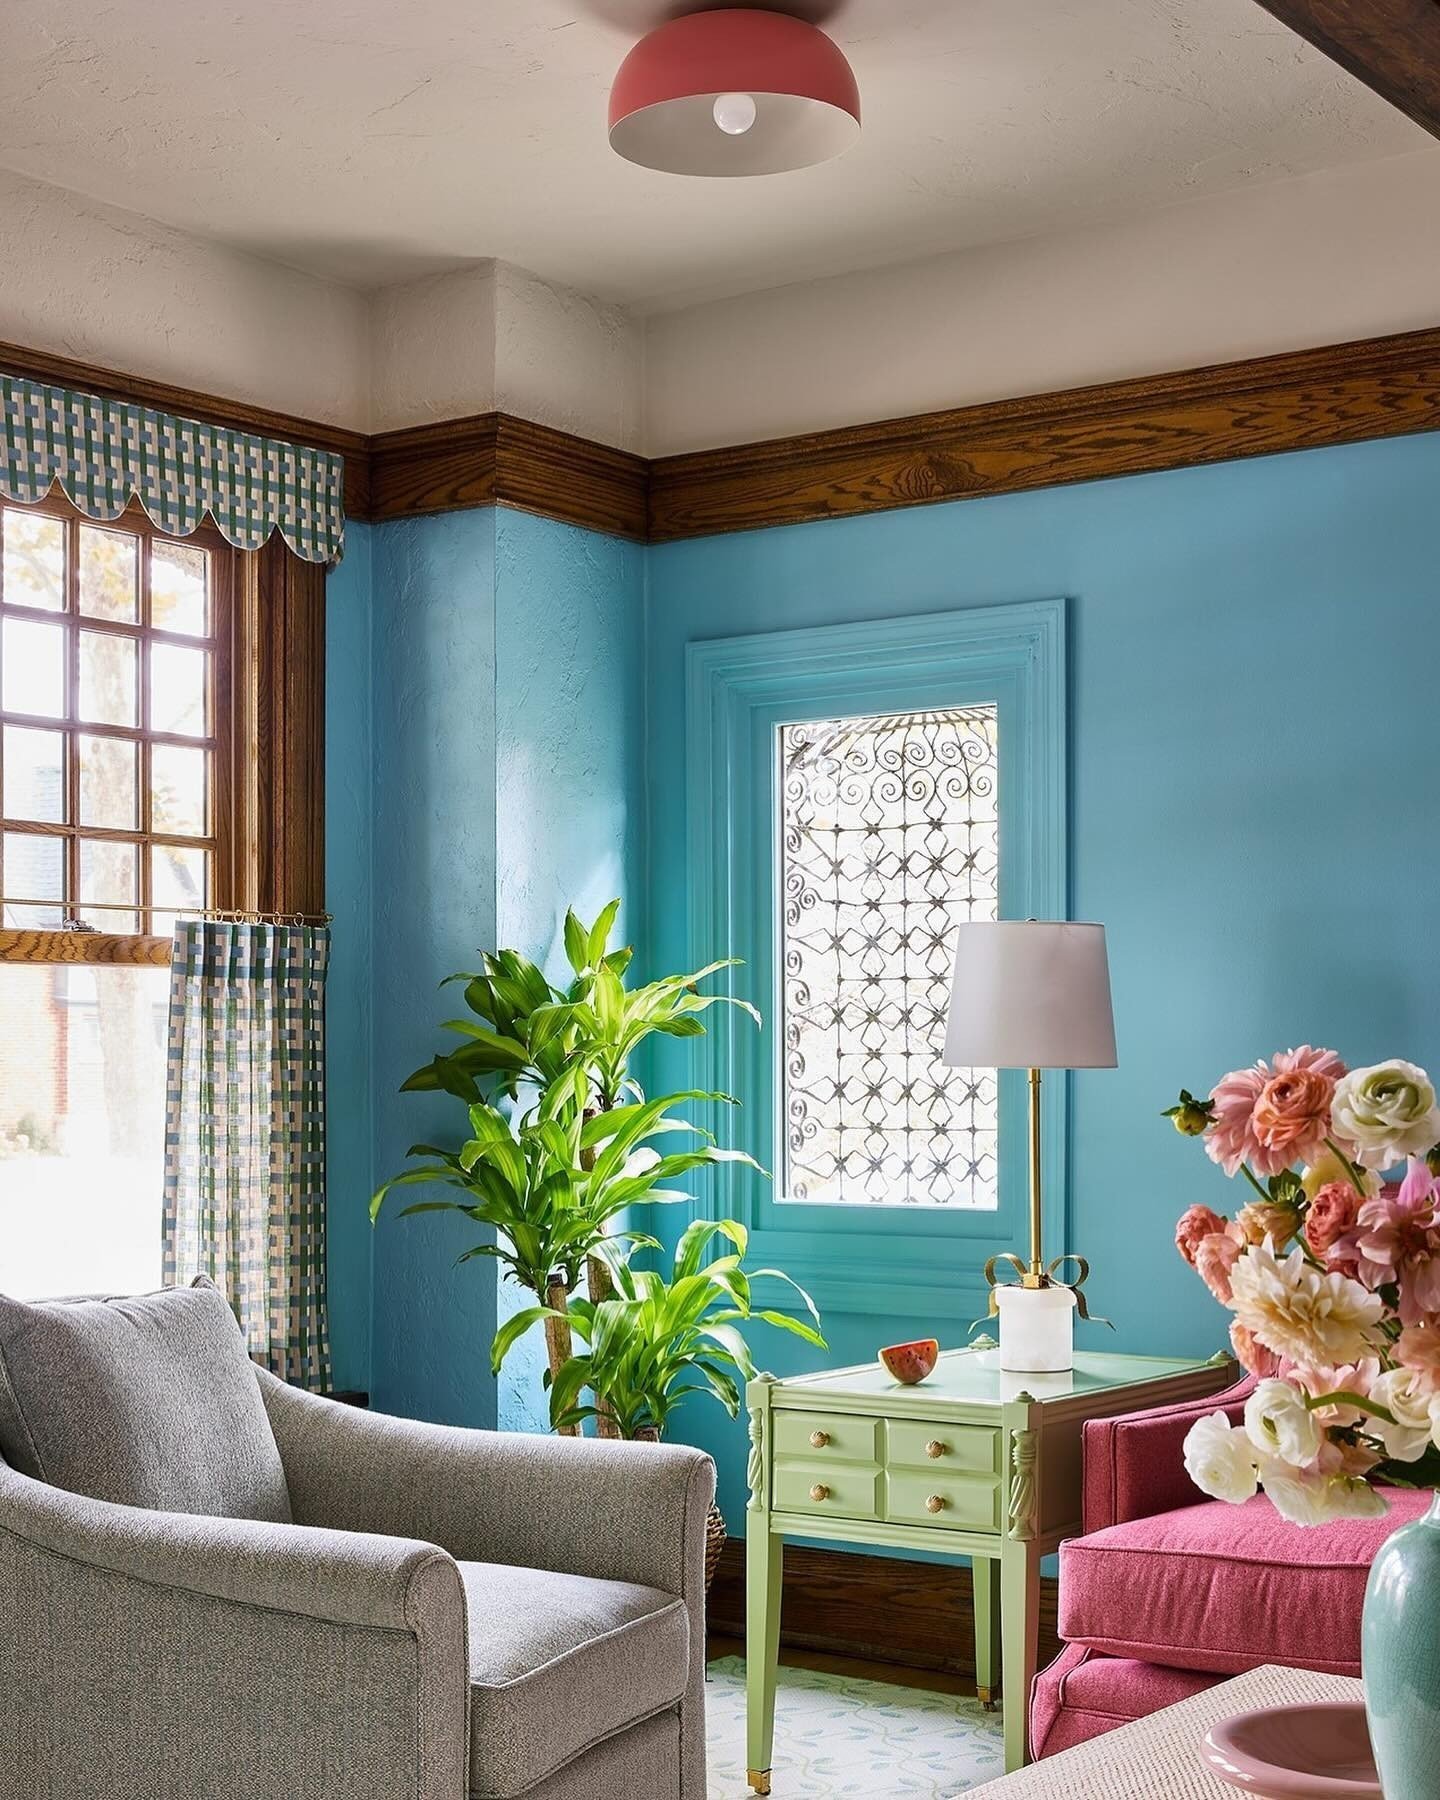 Huge thanks to Carly Moeller from Unpatterned Interior Design Studio for featuring our Anni Check 'Field' in this colourful room transformation.⁠
⁠
We love the scalloped pelmet, such a lovely detail!⁠
⁠
@unpatterned ⁠
photo @dustinforest of #Botanica